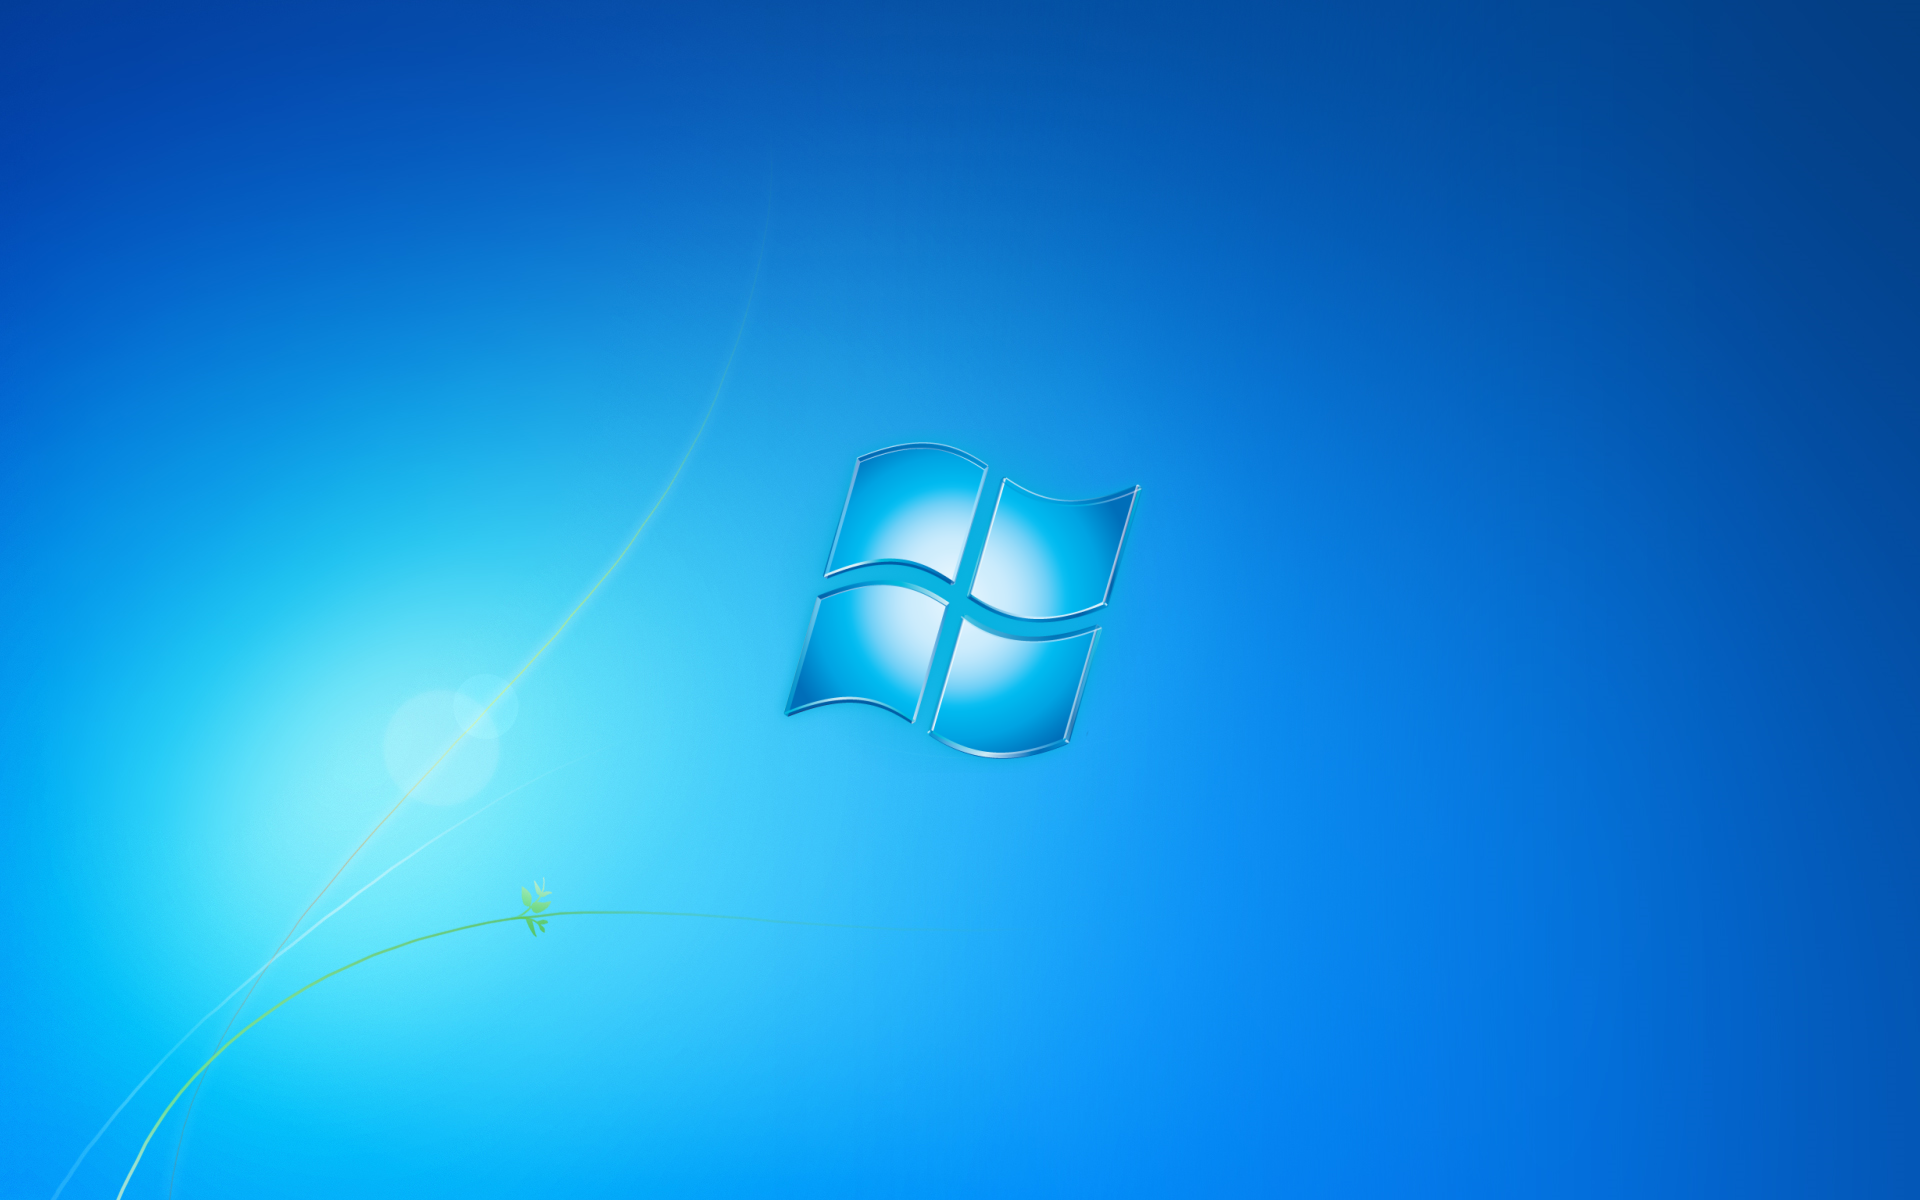 Threw this Windows 7 Starter wallpaper together if anyone wants it